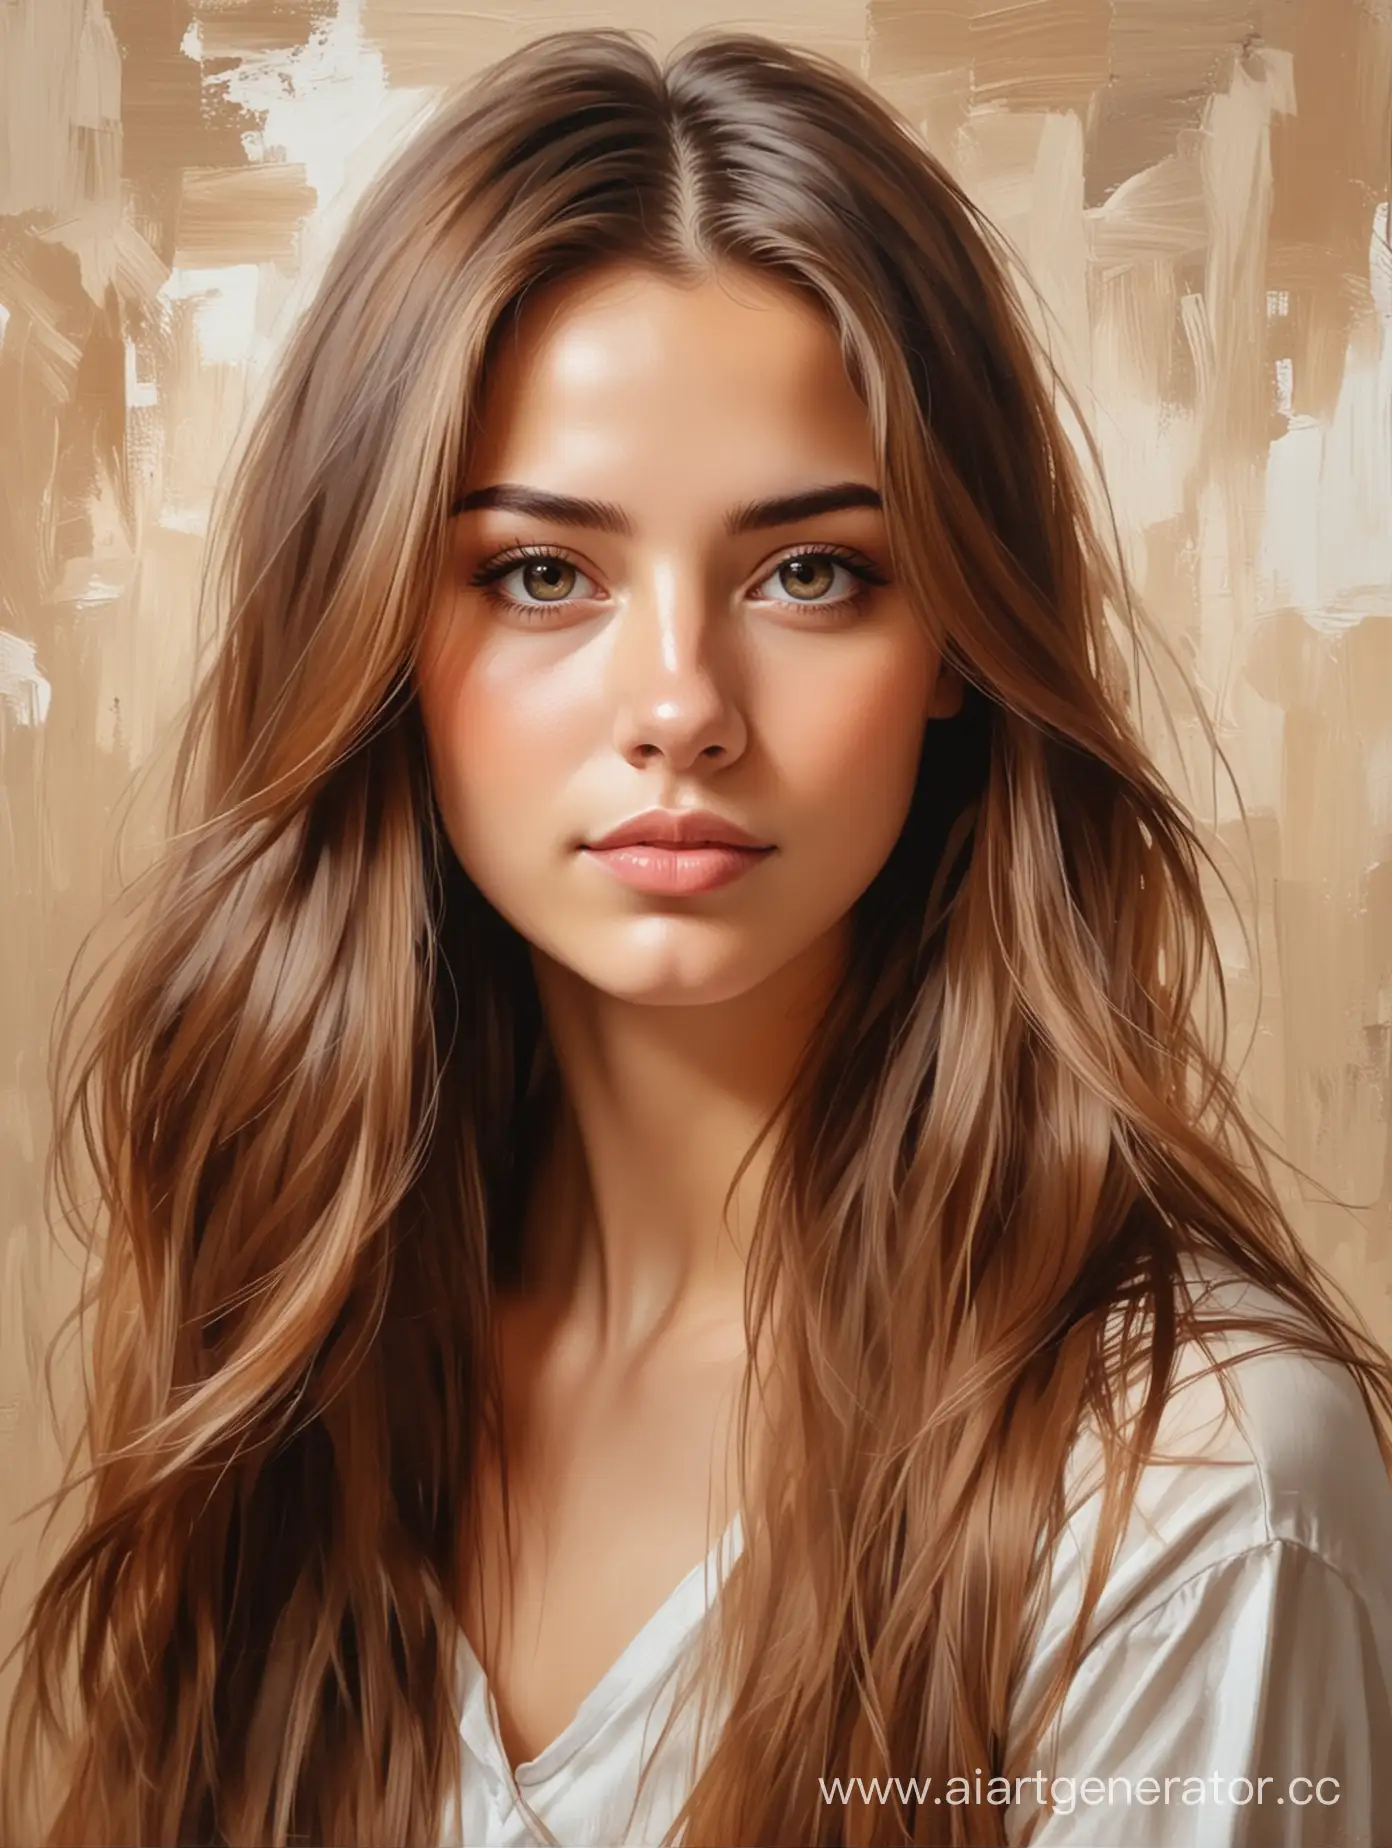 Portrait-of-a-Girl-with-Long-Brown-Hair-in-Beige-White-Brown-Brush-Strokes-Oil-Painting